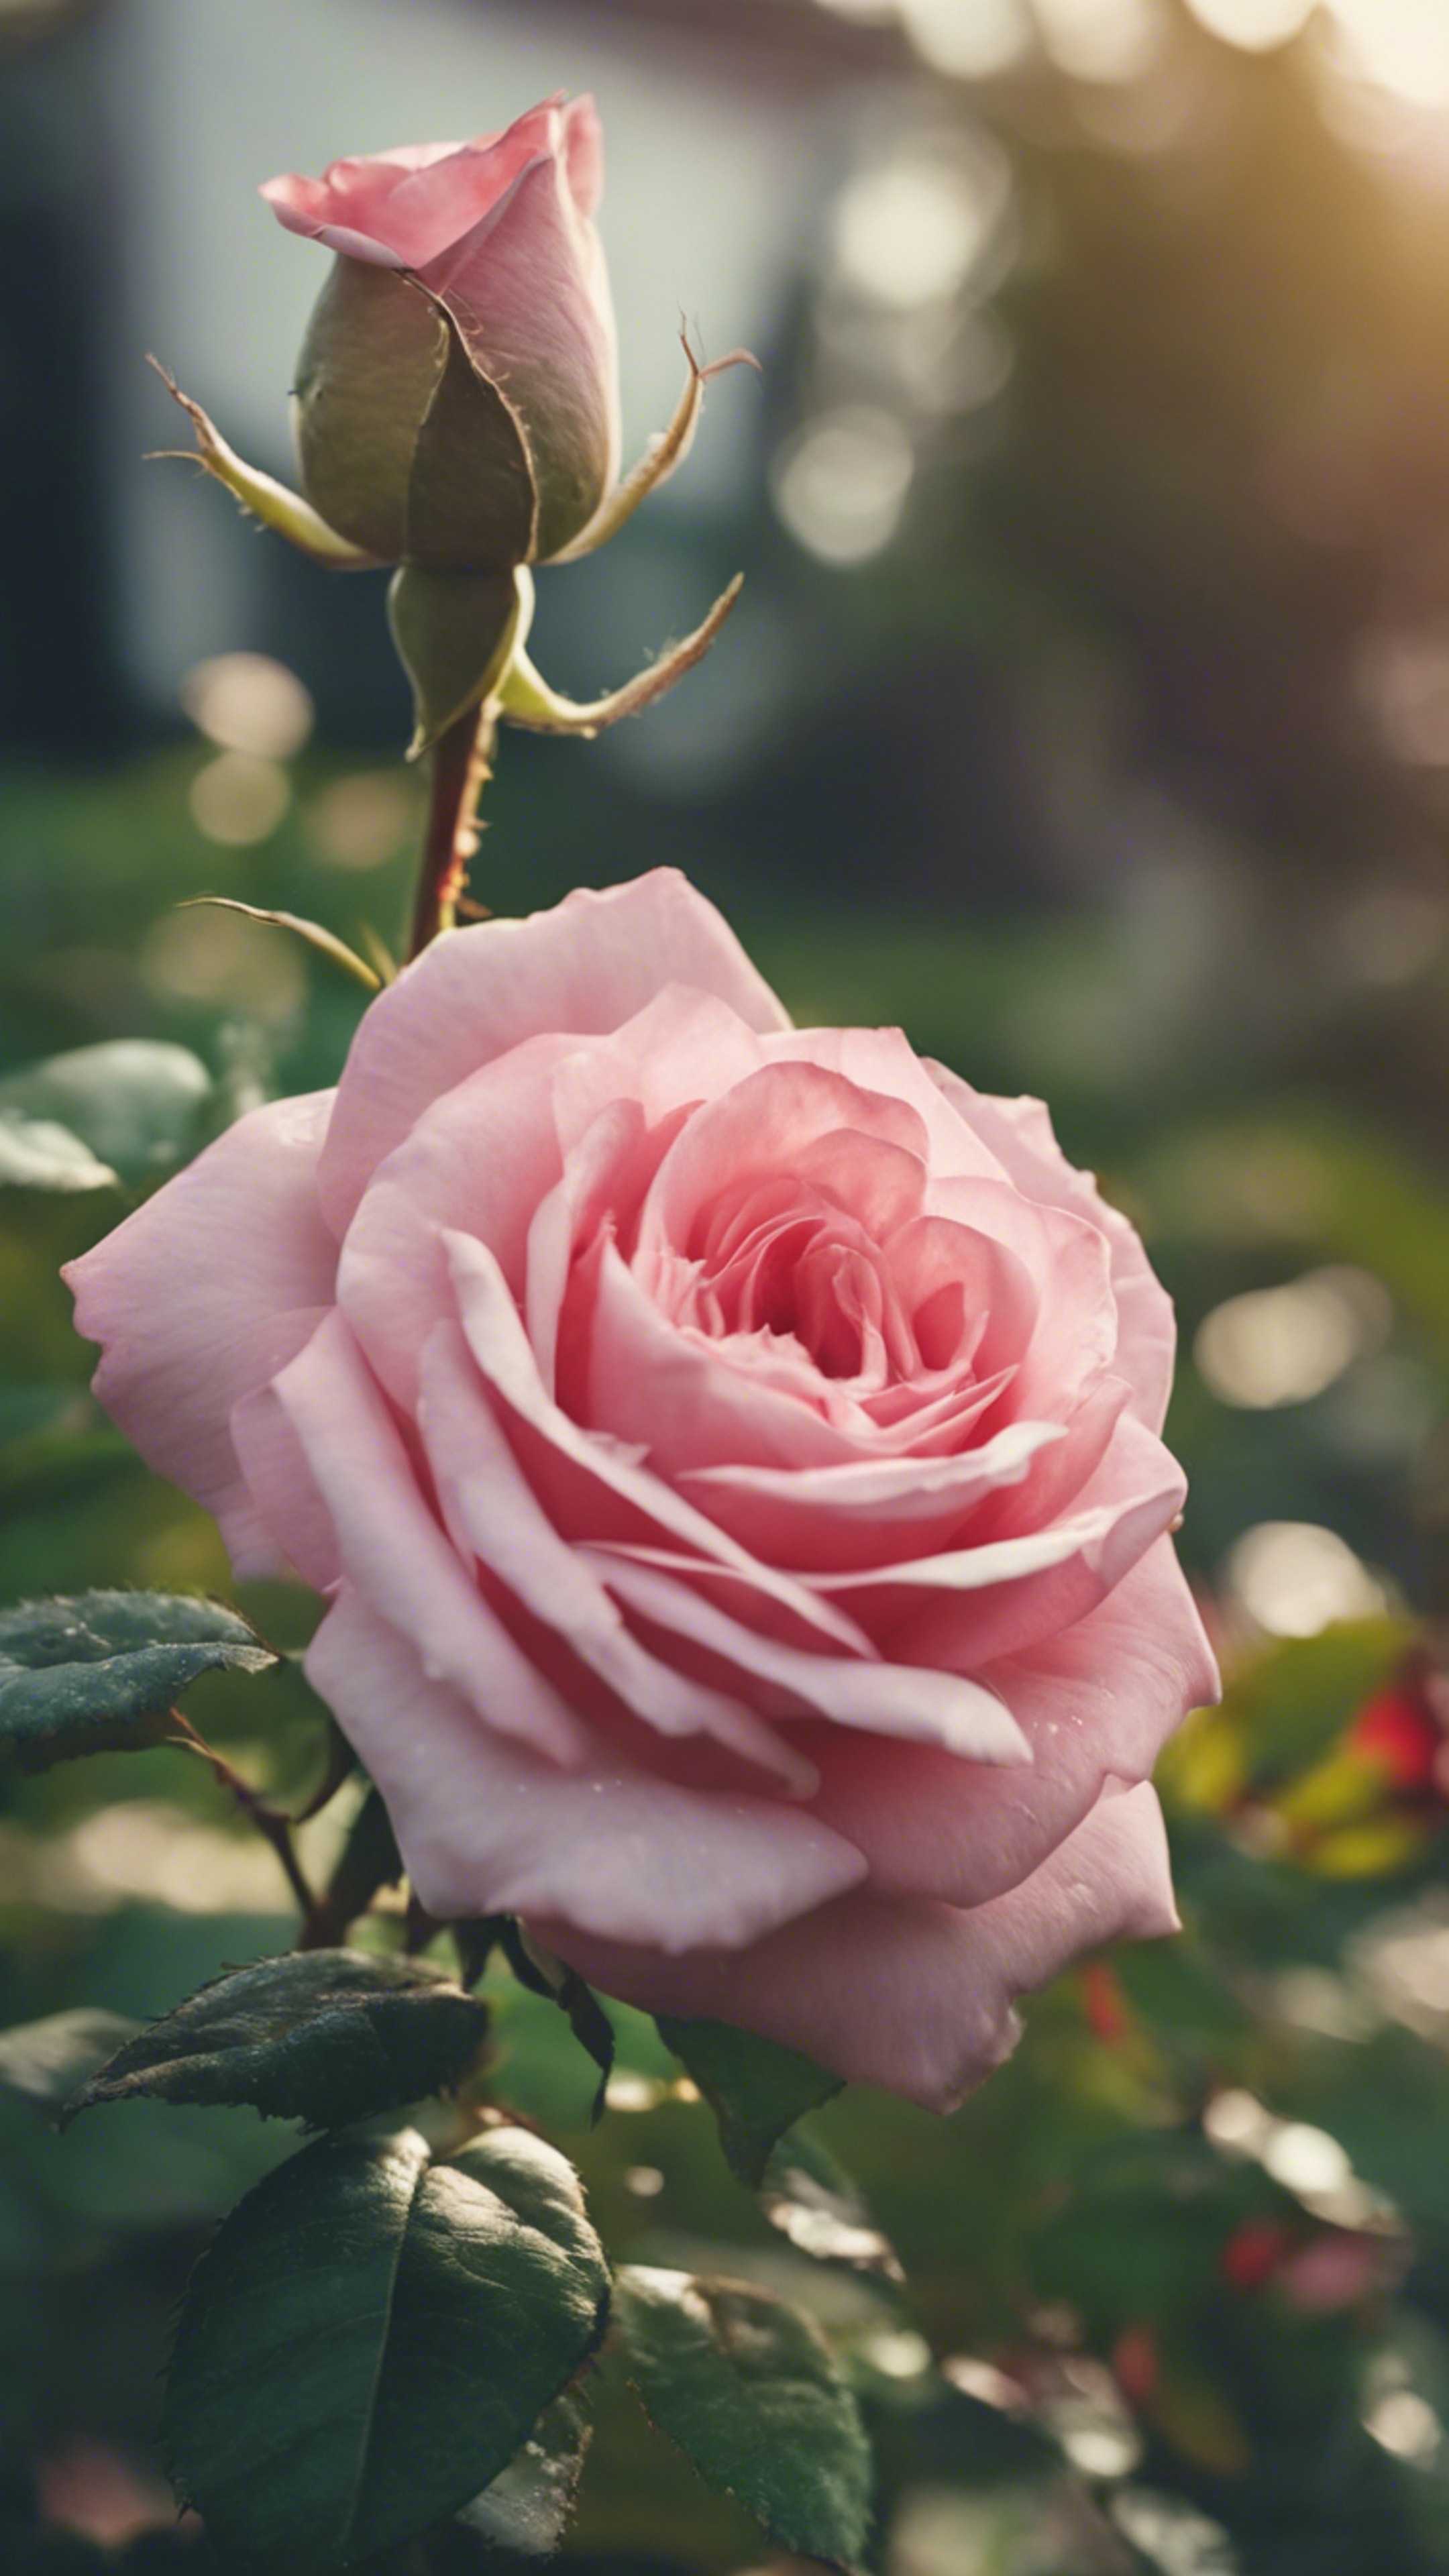 A beautiful pink heart-shaped rose blooming in a lush green garden. Wallpaper[602cae484ee541a8ab0b]